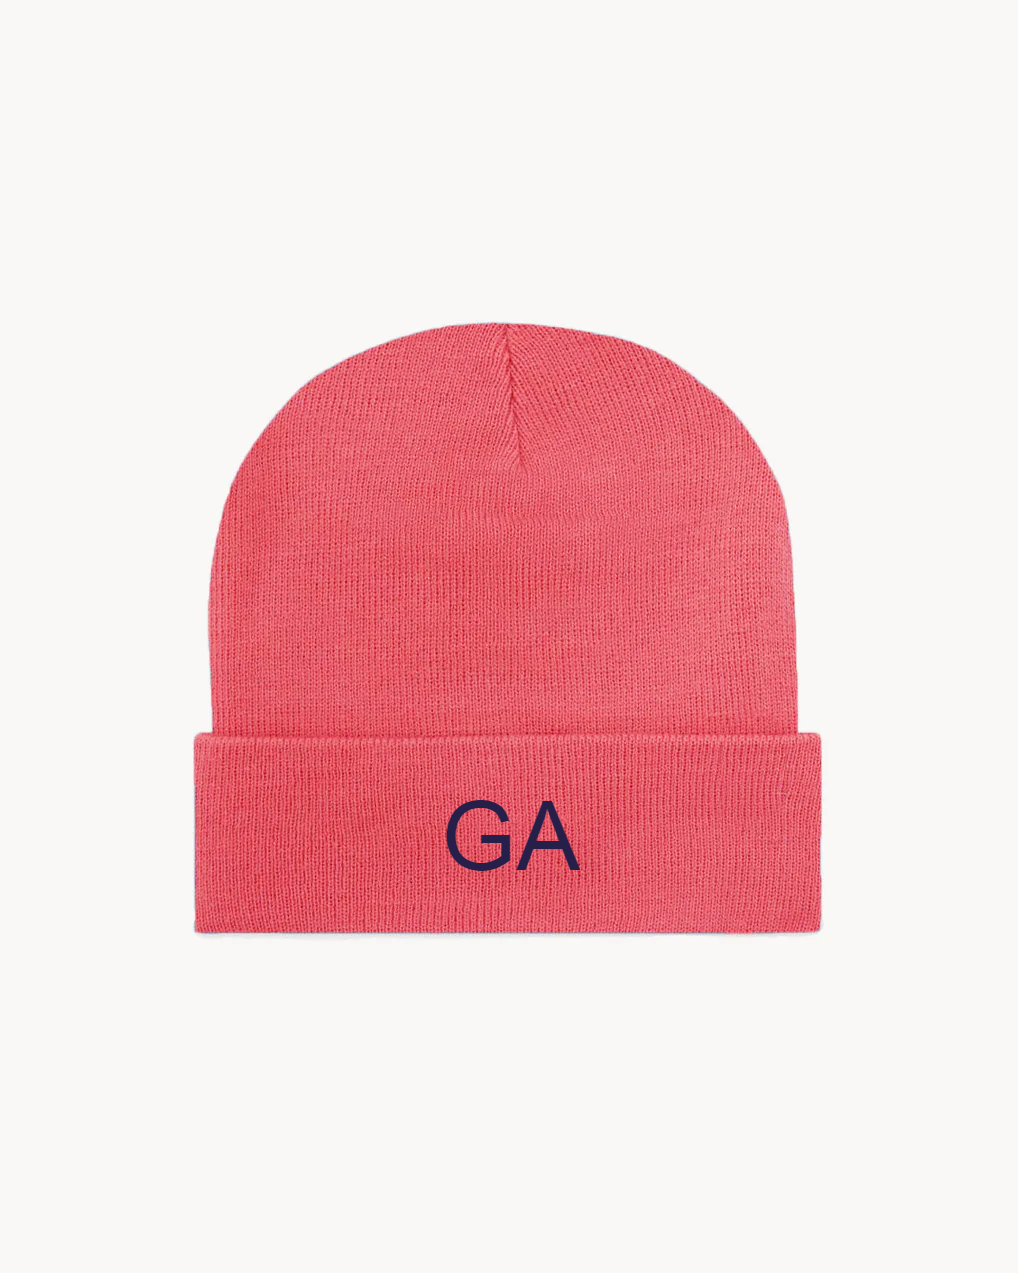 CORAL HAT | CUSTOM EMBROIDERY